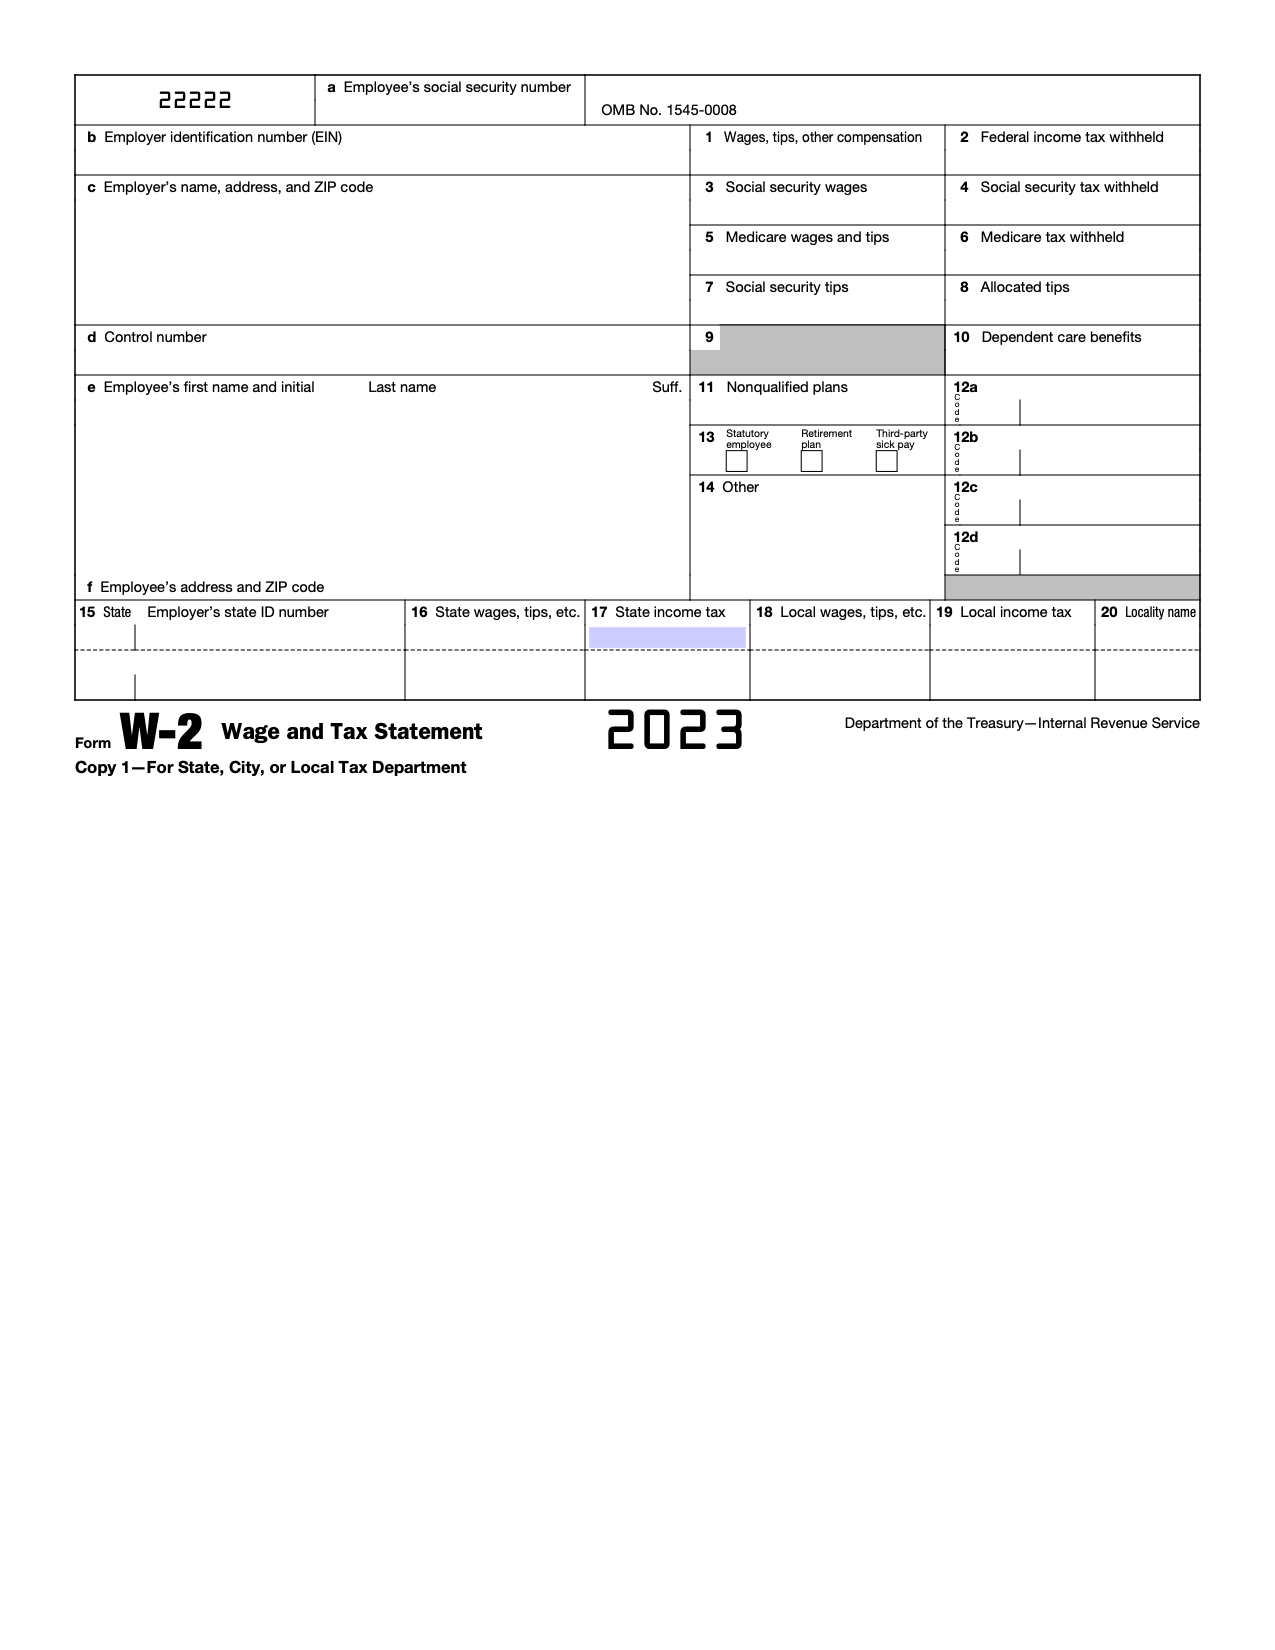 Free Irs Form W-2 | Wage And Tax Statement - Pdf – Eforms with When Does Ups Send W2 Forms